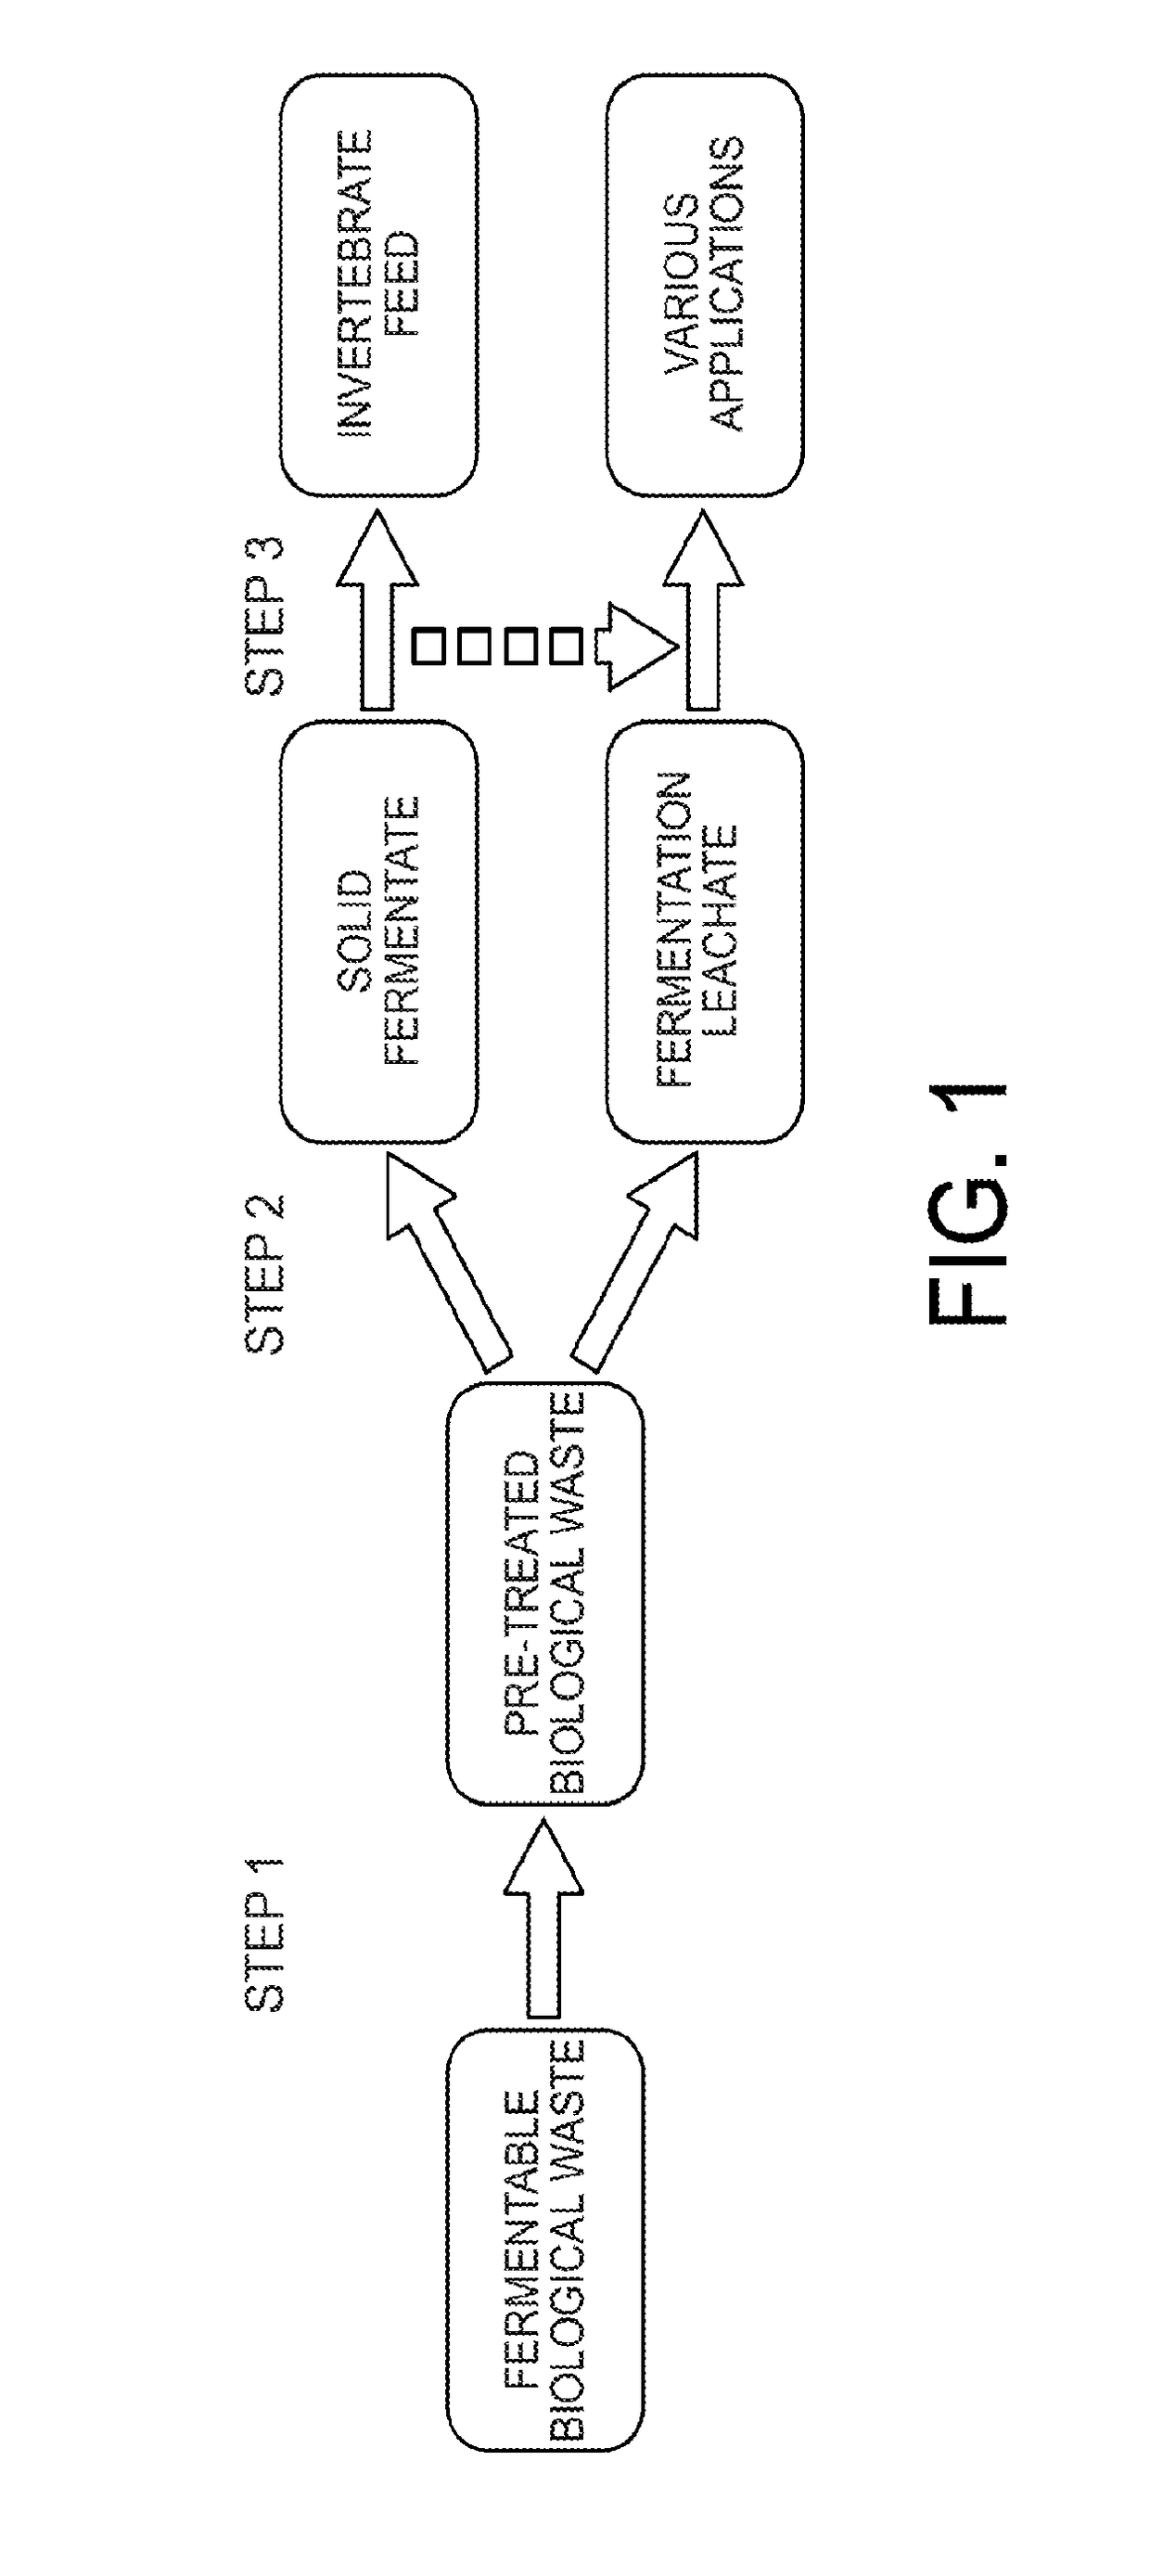 Method for converting food waste and other biological waste into invertebrate feed